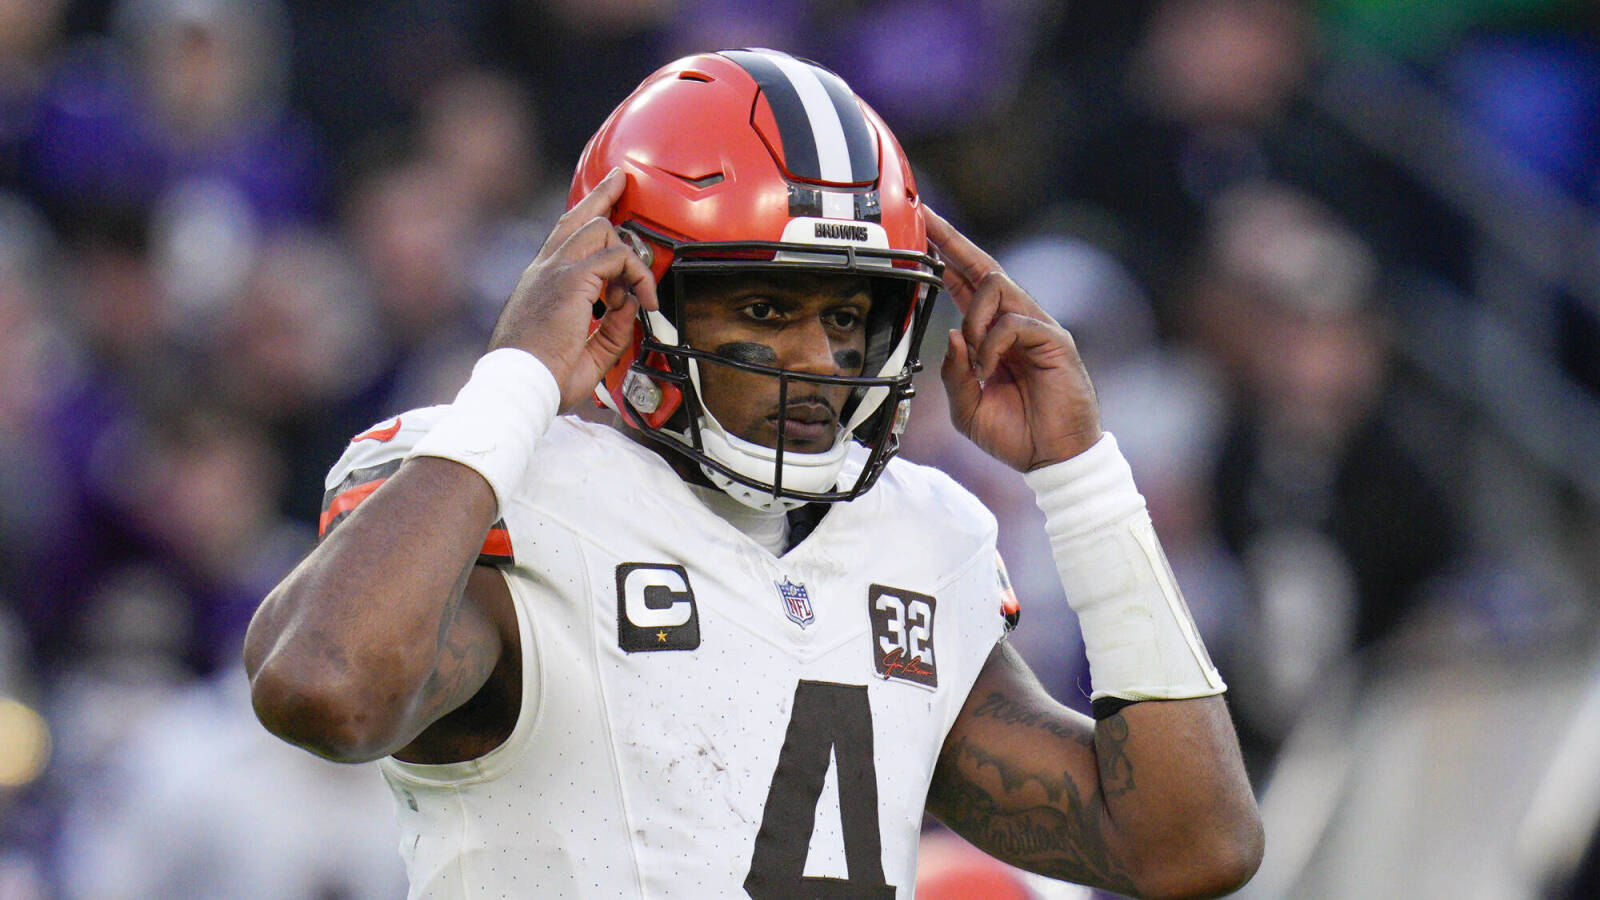 Insider says Browns QB Deshaun Watson’s job could be in jeopardy